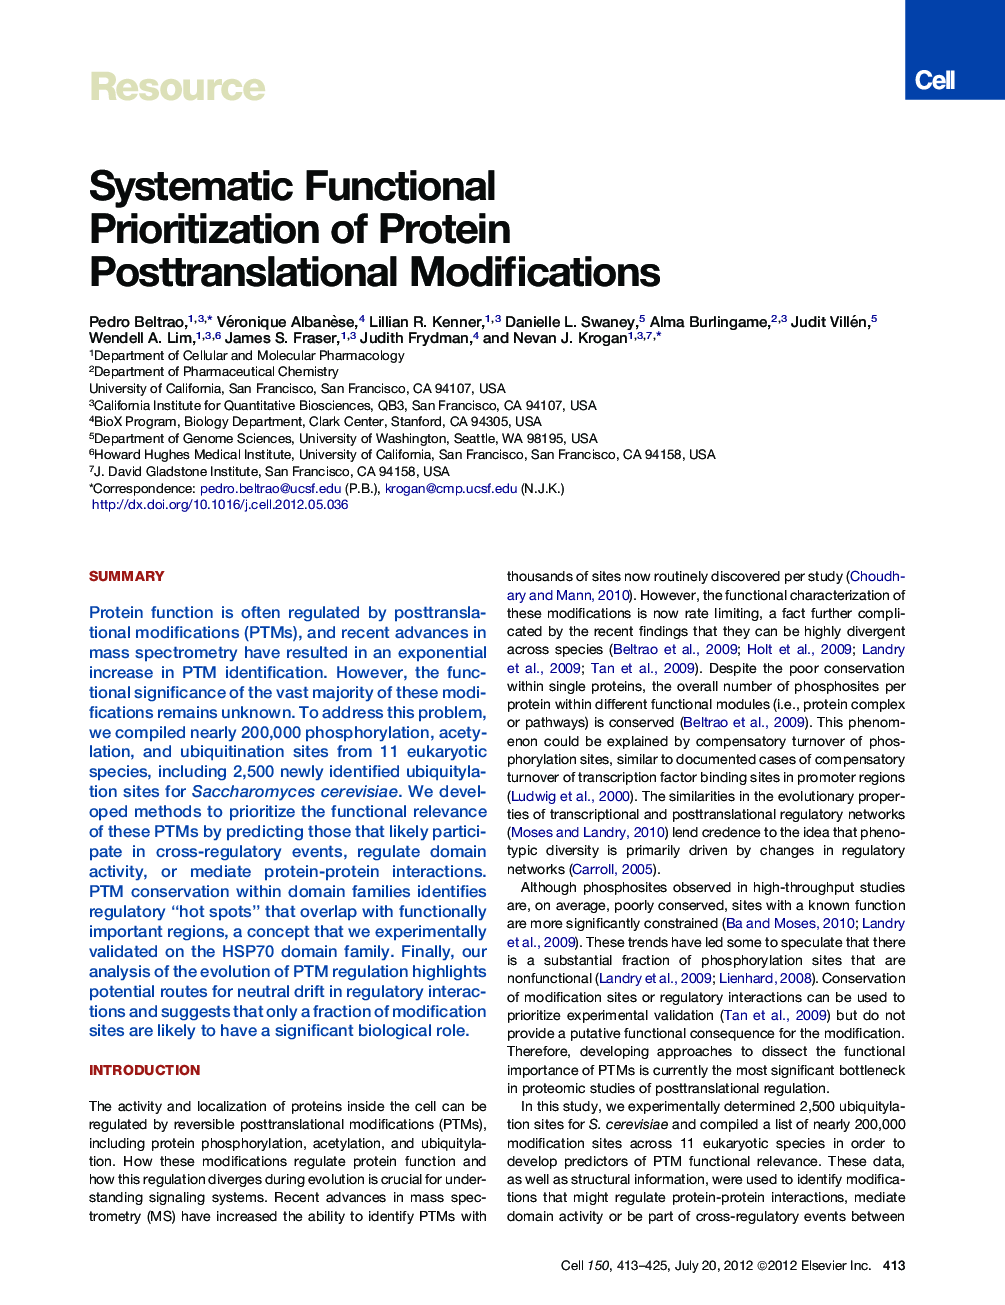 Systematic Functional Prioritization of Protein Posttranslational Modifications